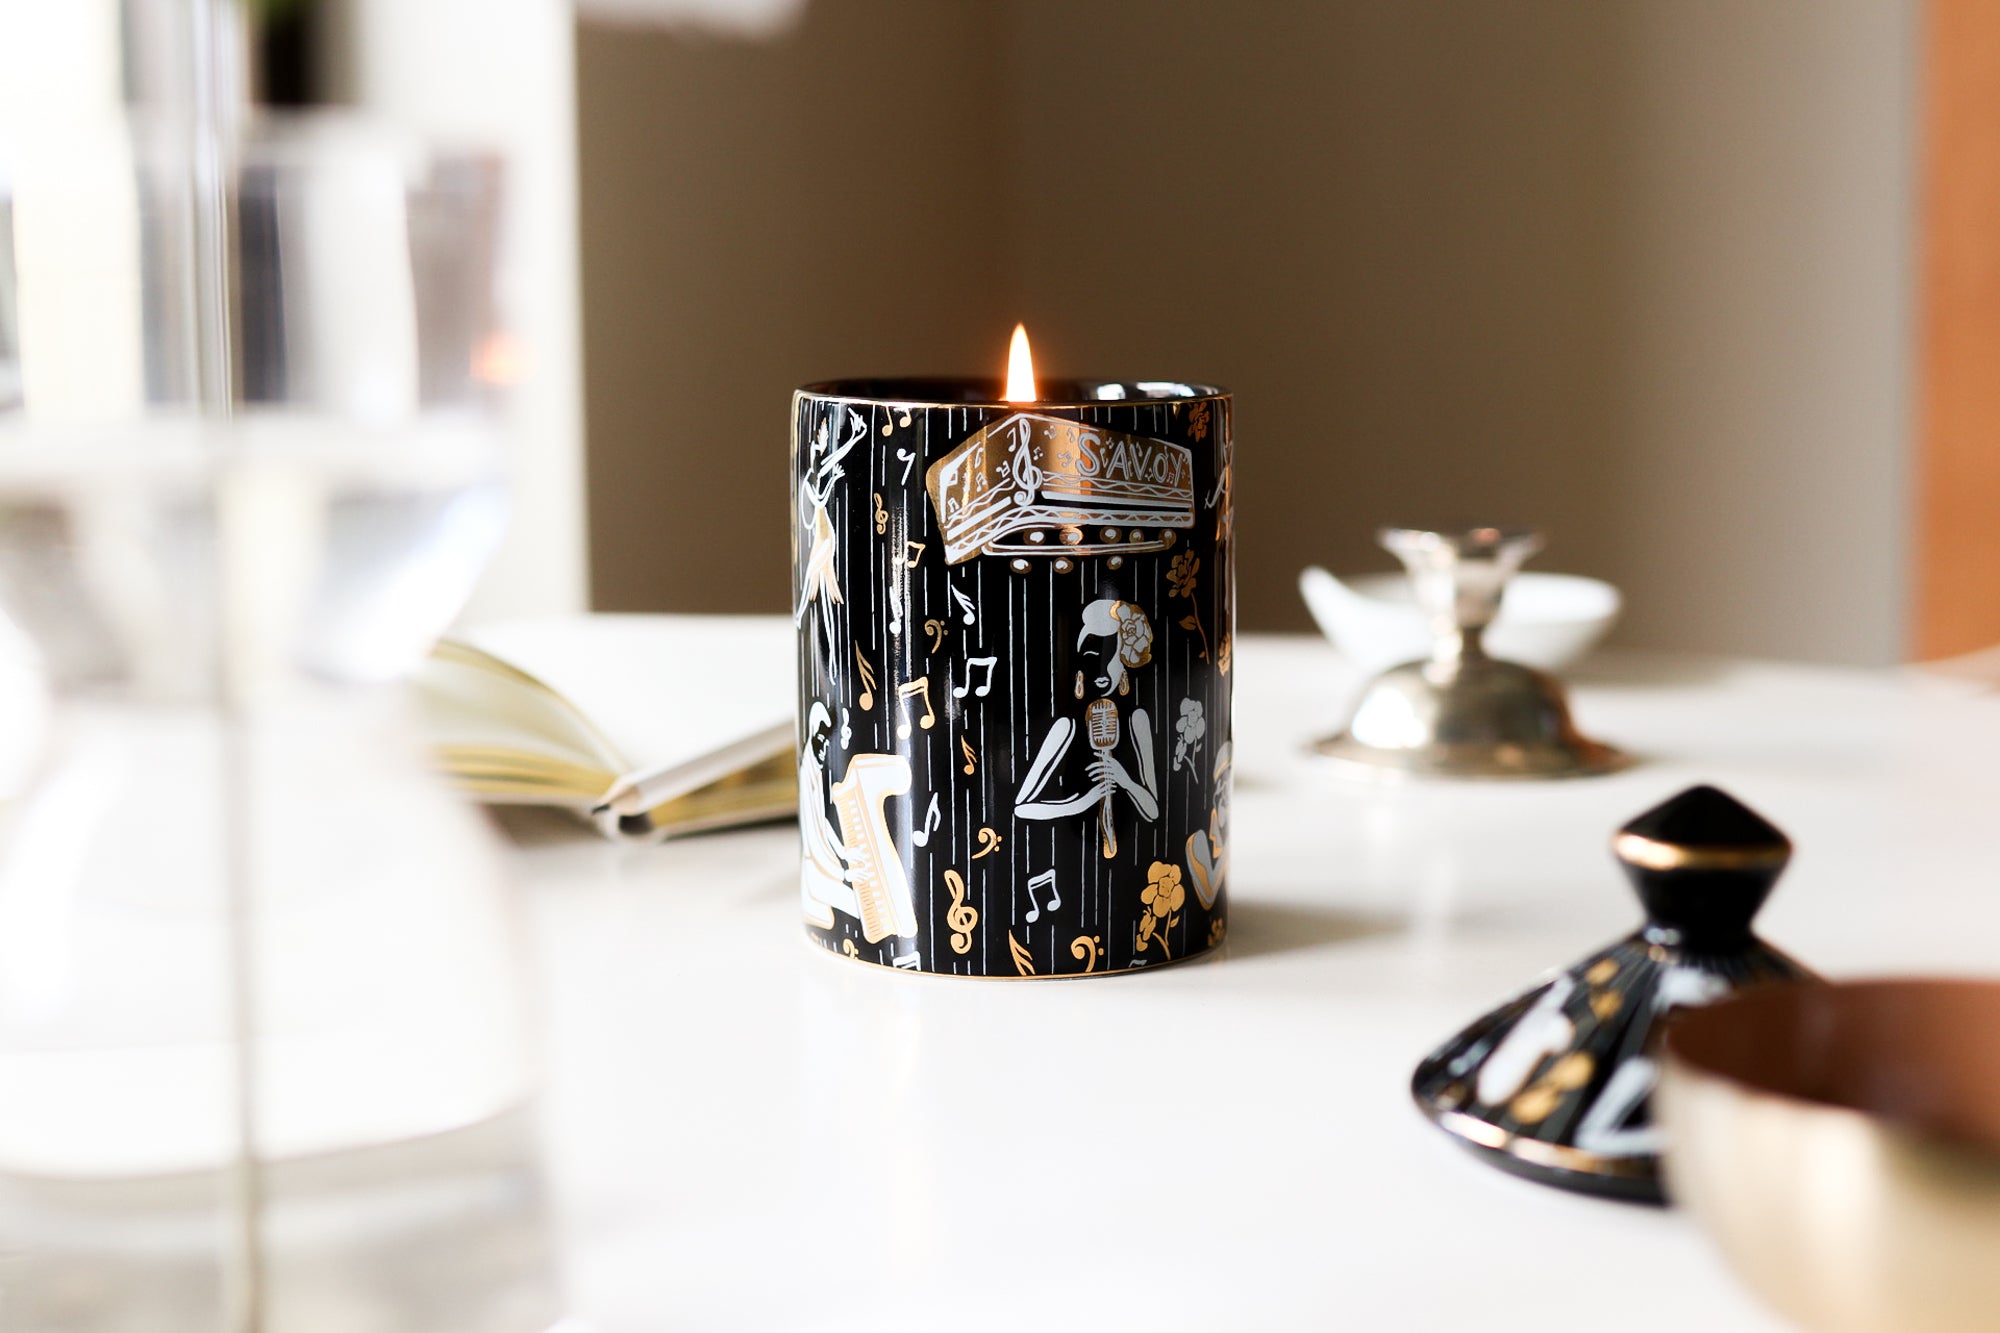 This is an image of our duke, Harlem Renaissance candle in black, white and gold.